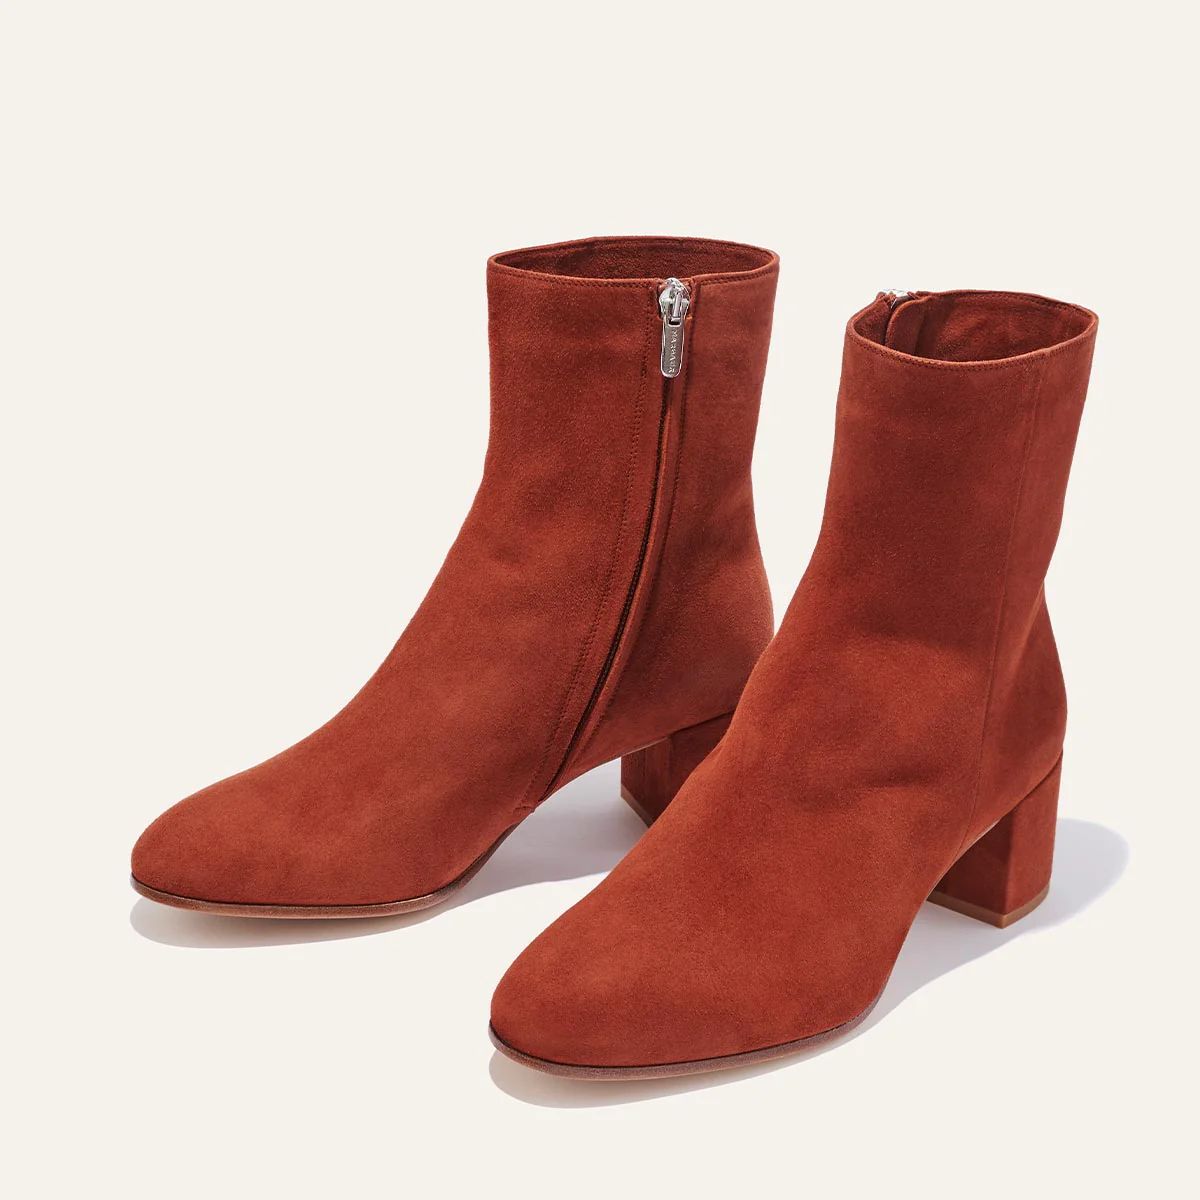 The Boot - Brandy Suede | Margaux